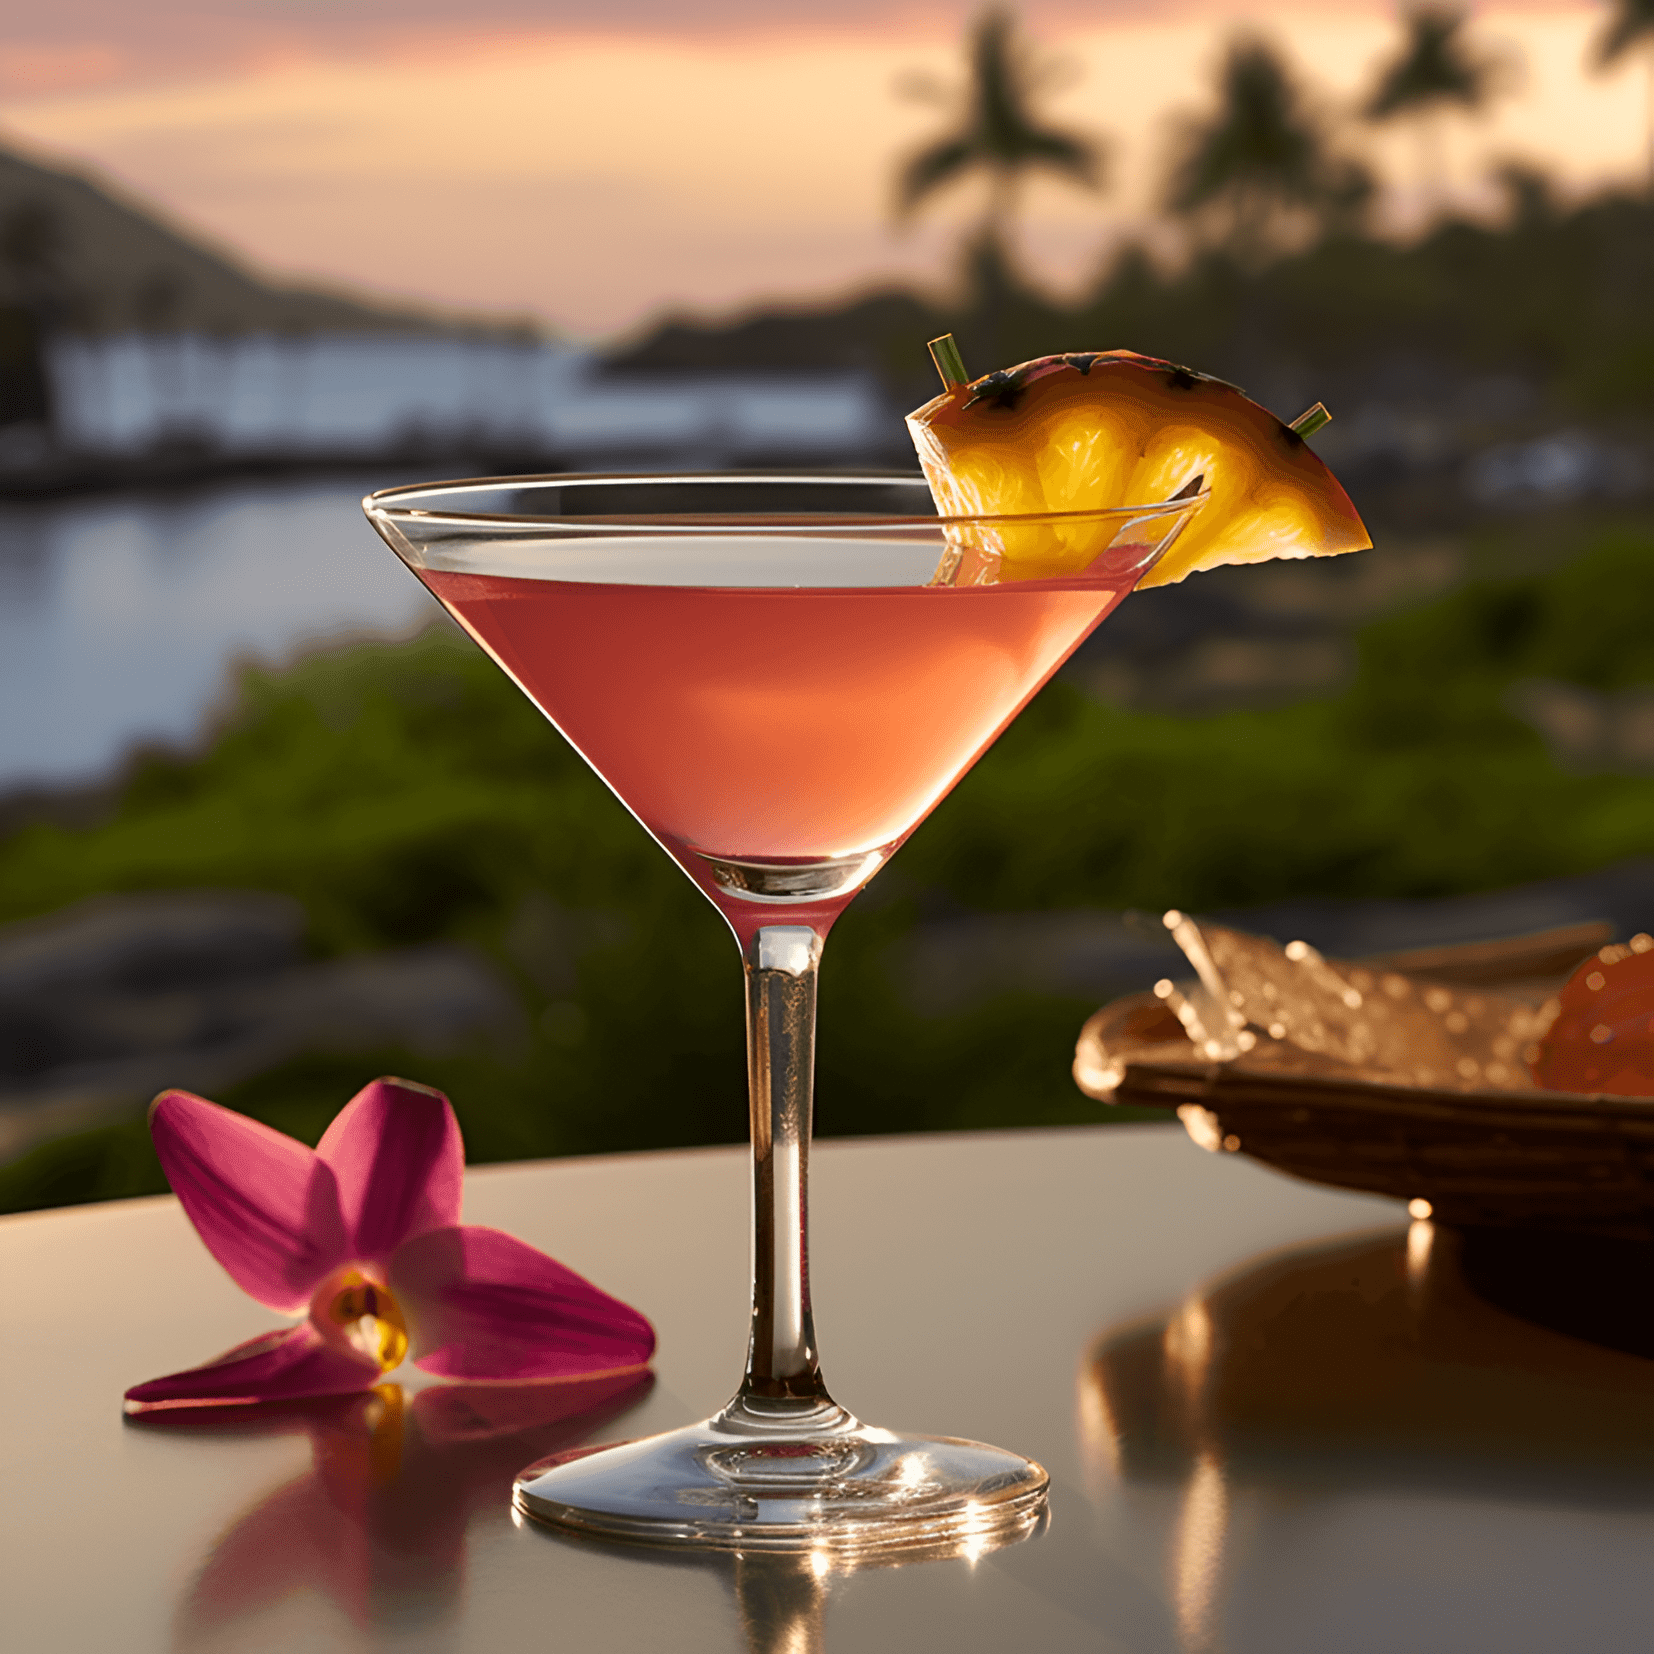 Royal Hawaiian Cocktail Recipe - The Royal Hawaiian cocktail has a sweet and fruity taste, with a hint of tartness from the pineapple juice. The gin adds a subtle herbal and floral note, while the orgeat syrup provides a rich almond flavor. Overall, the drink is well-balanced, refreshing, and perfect for sipping on a warm day.